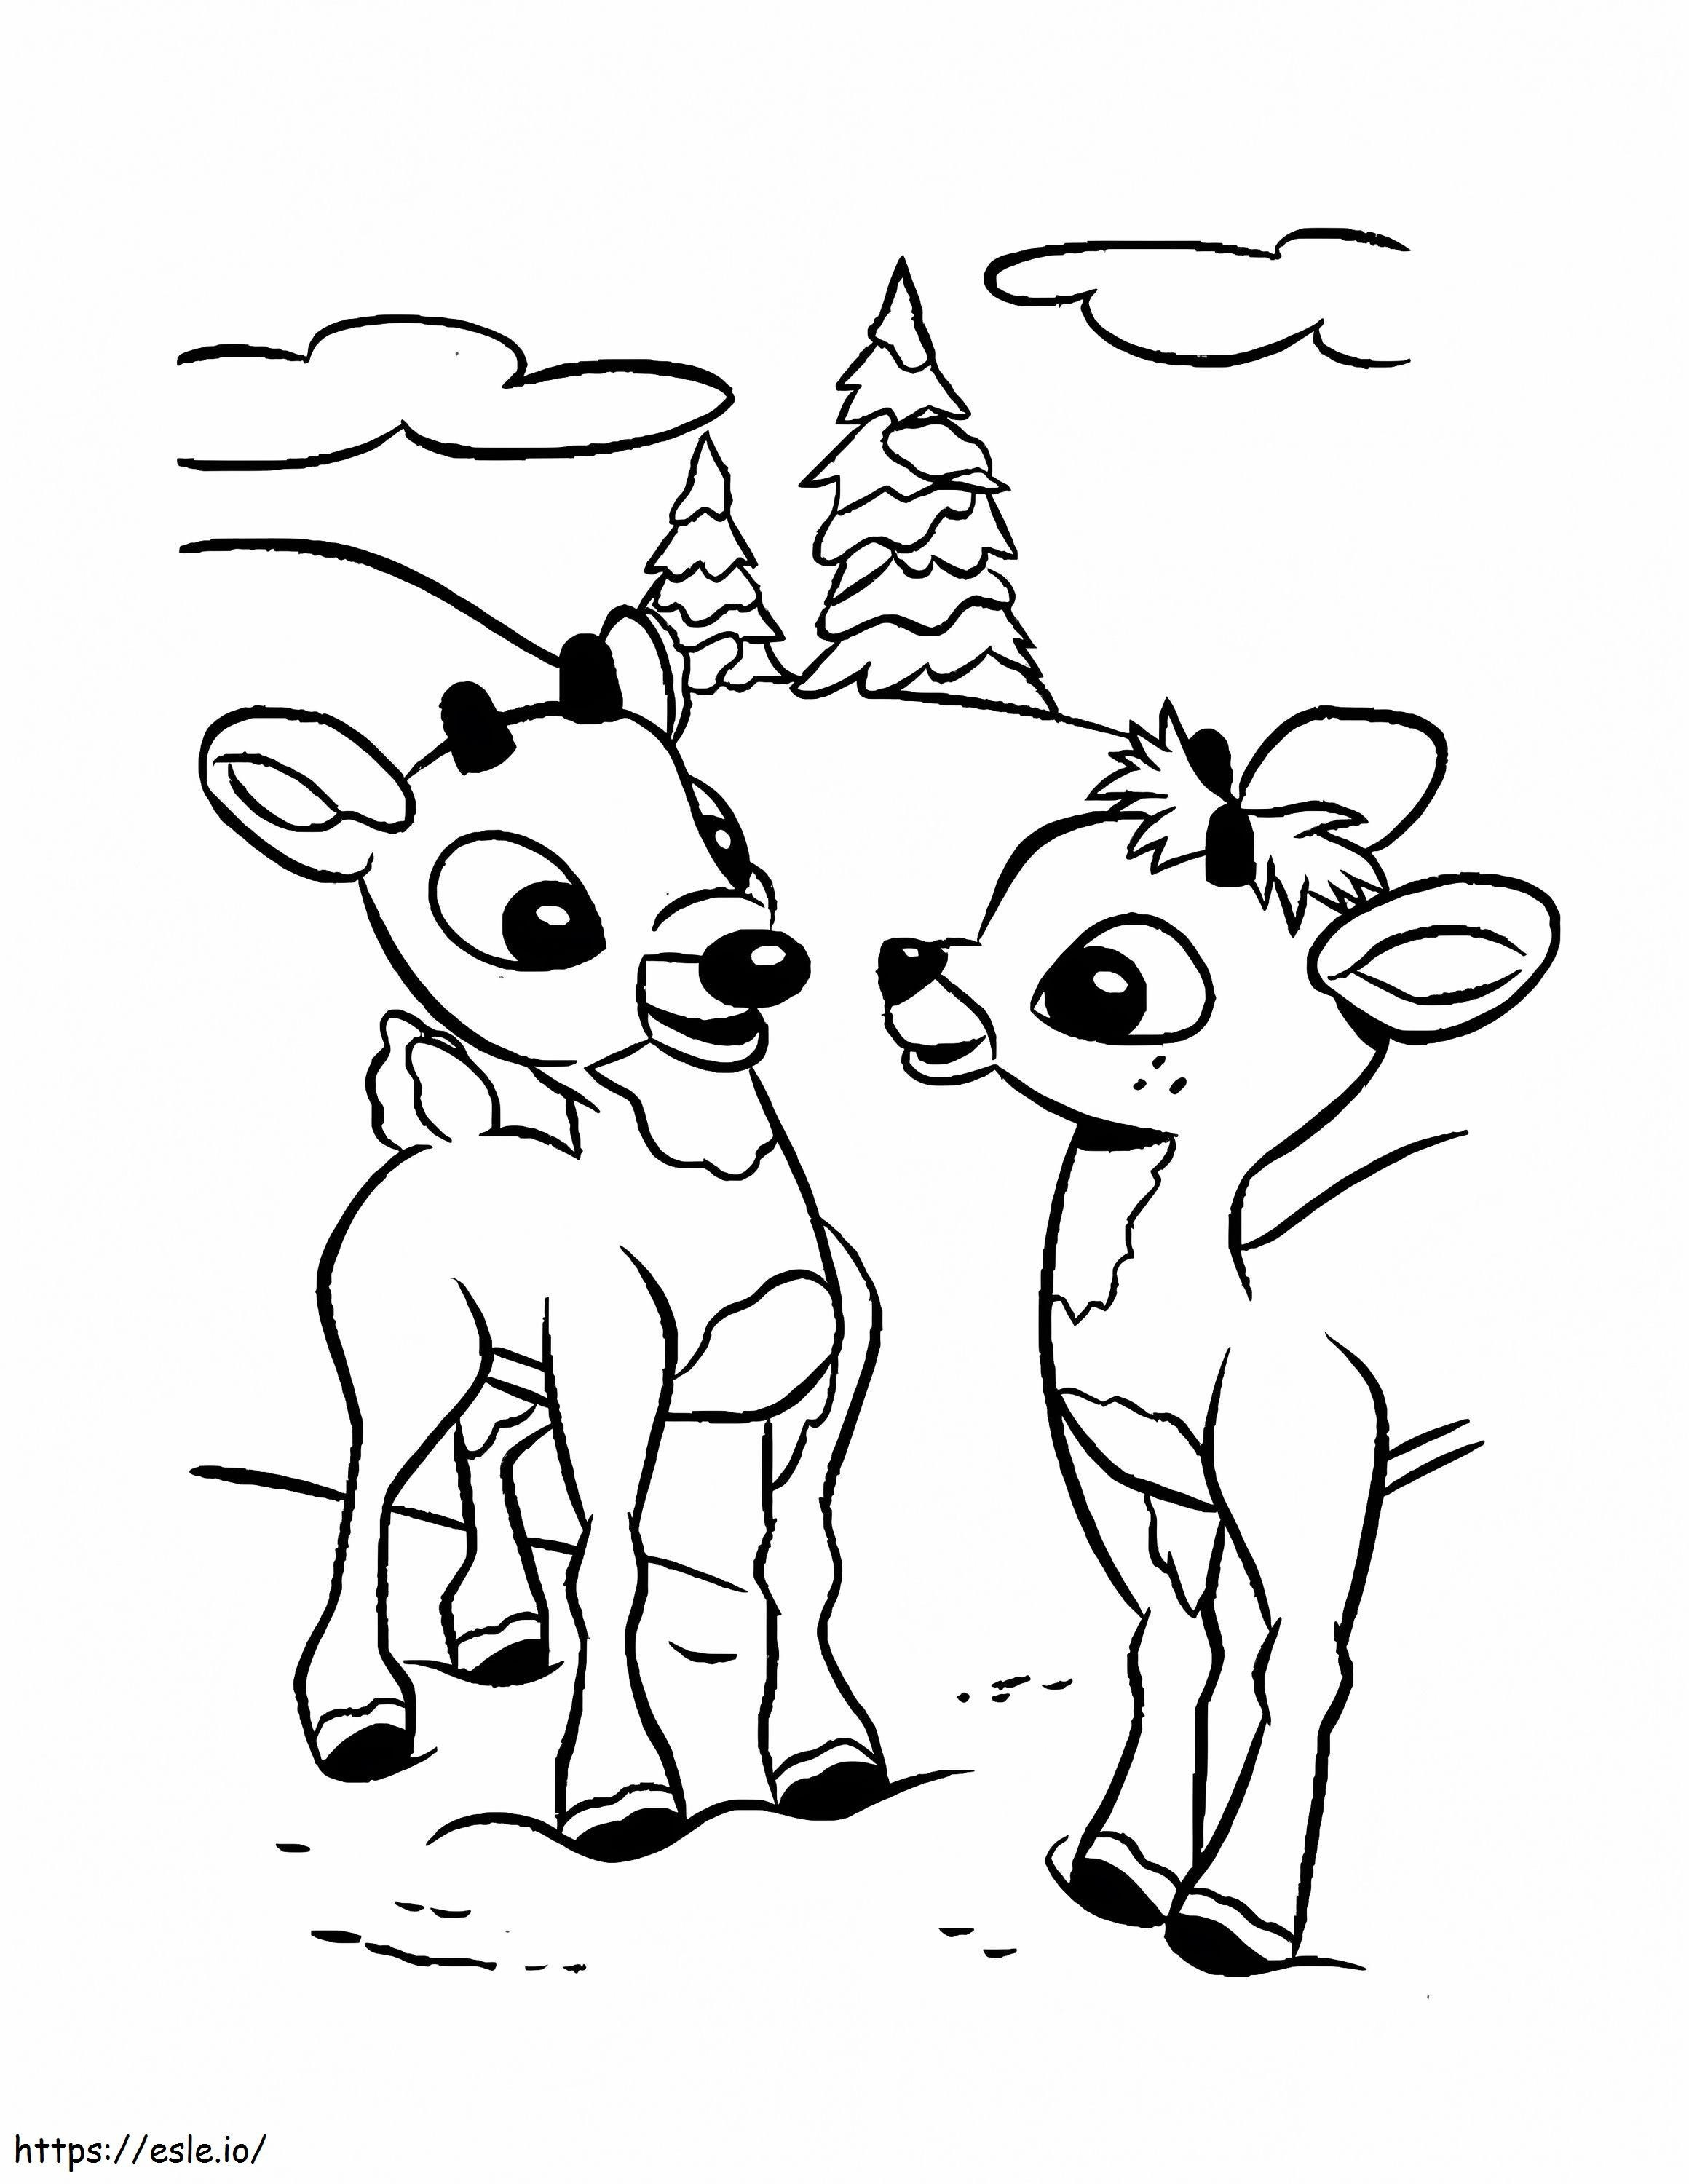 Rudolphs Friends coloring page